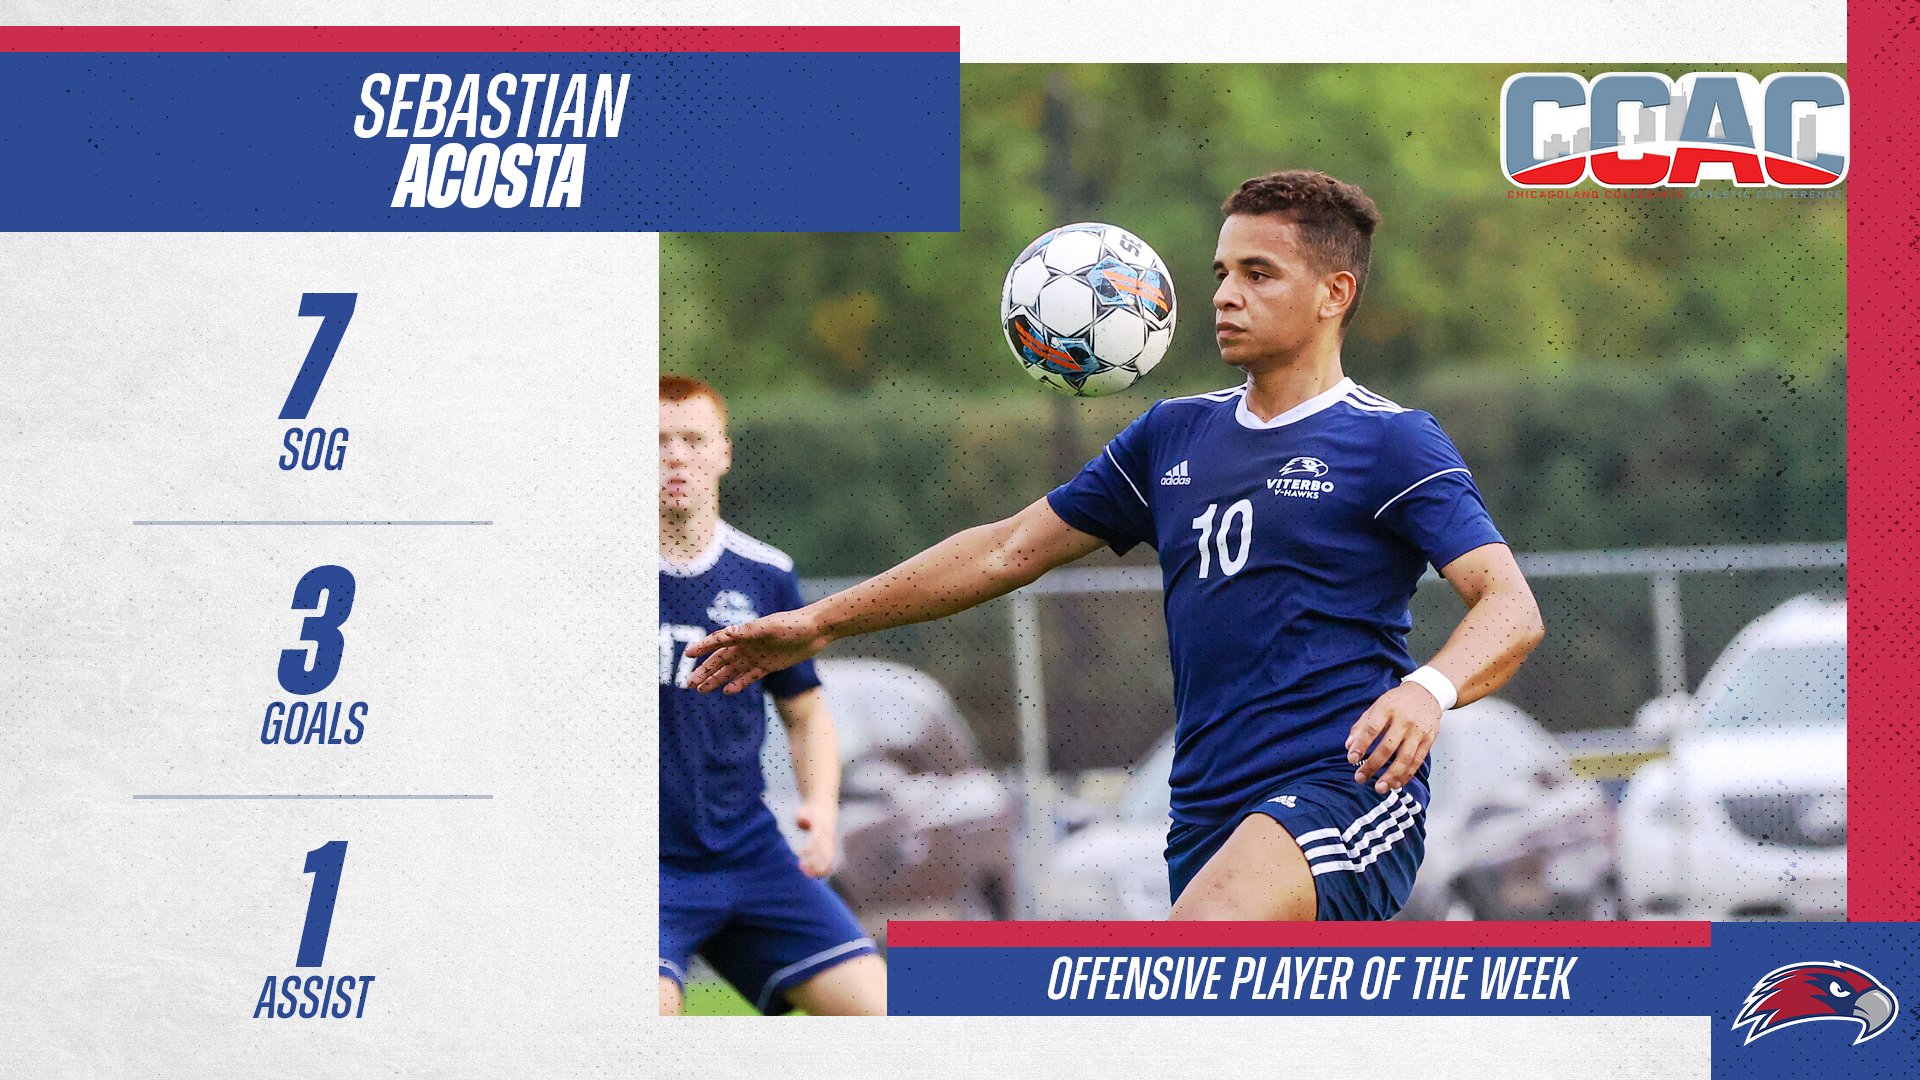 Acosta Named Offensive Player of the Week